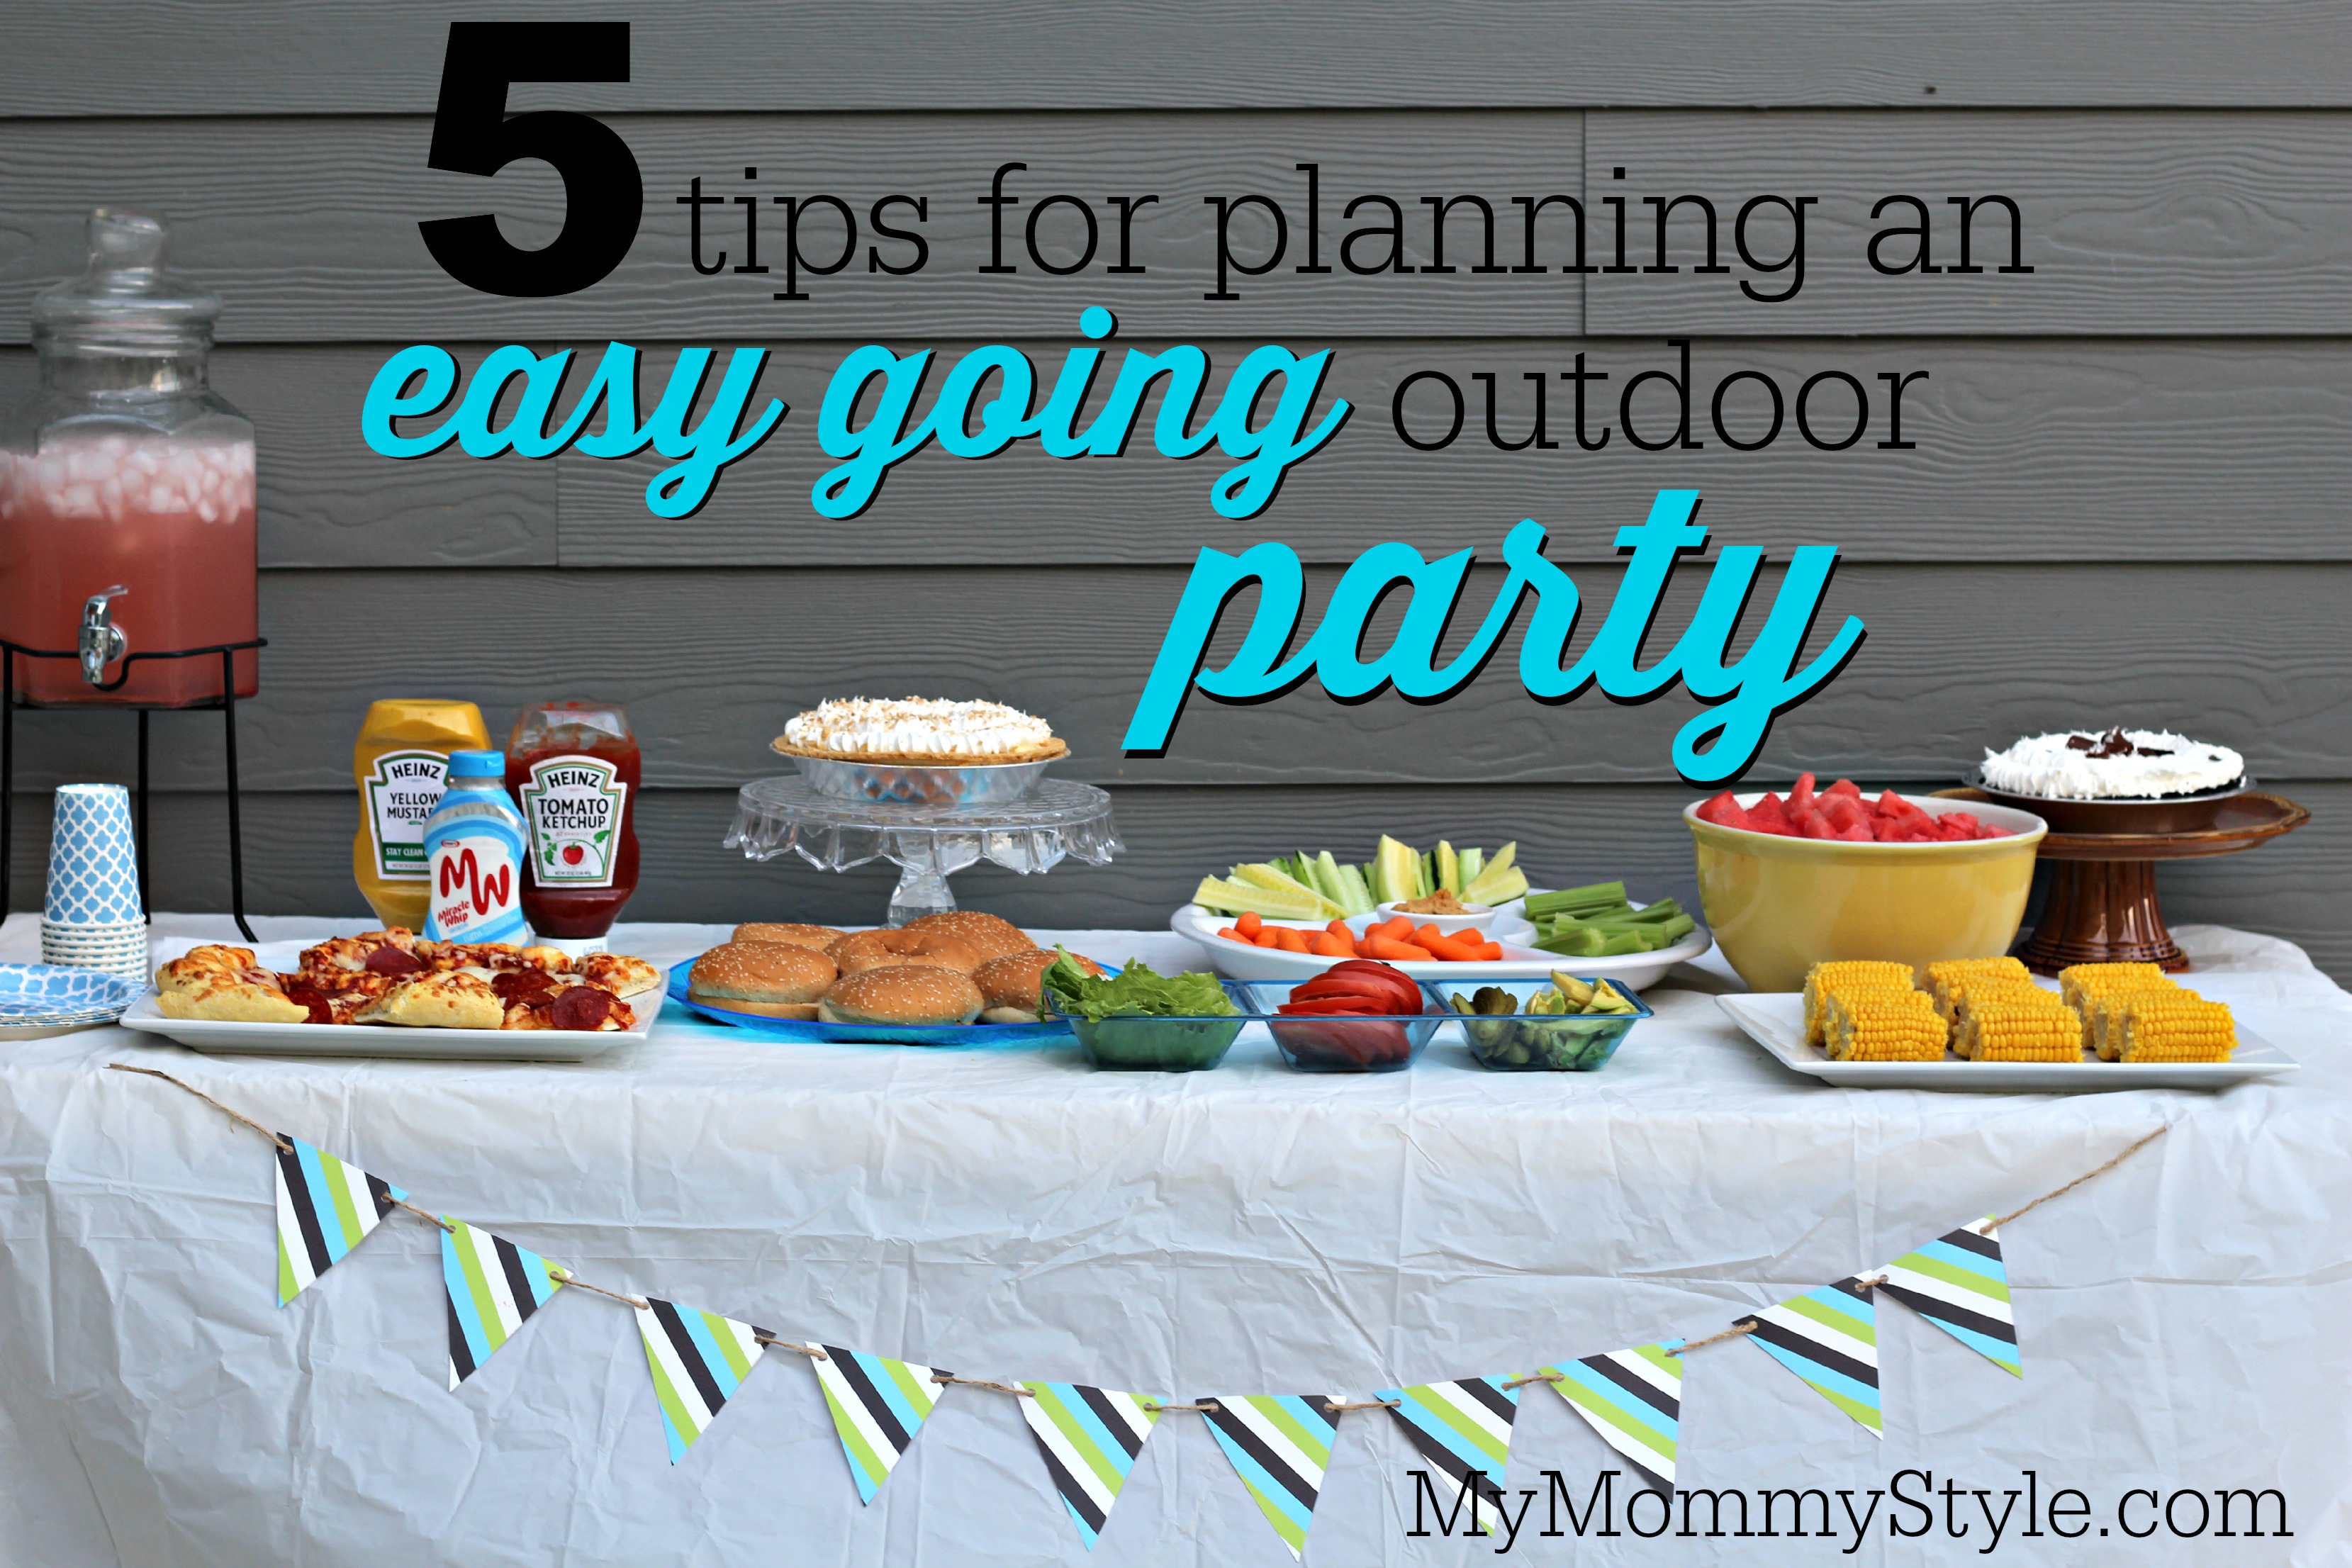 5 tips for planning an easy going outdoor party - My Mommy ...